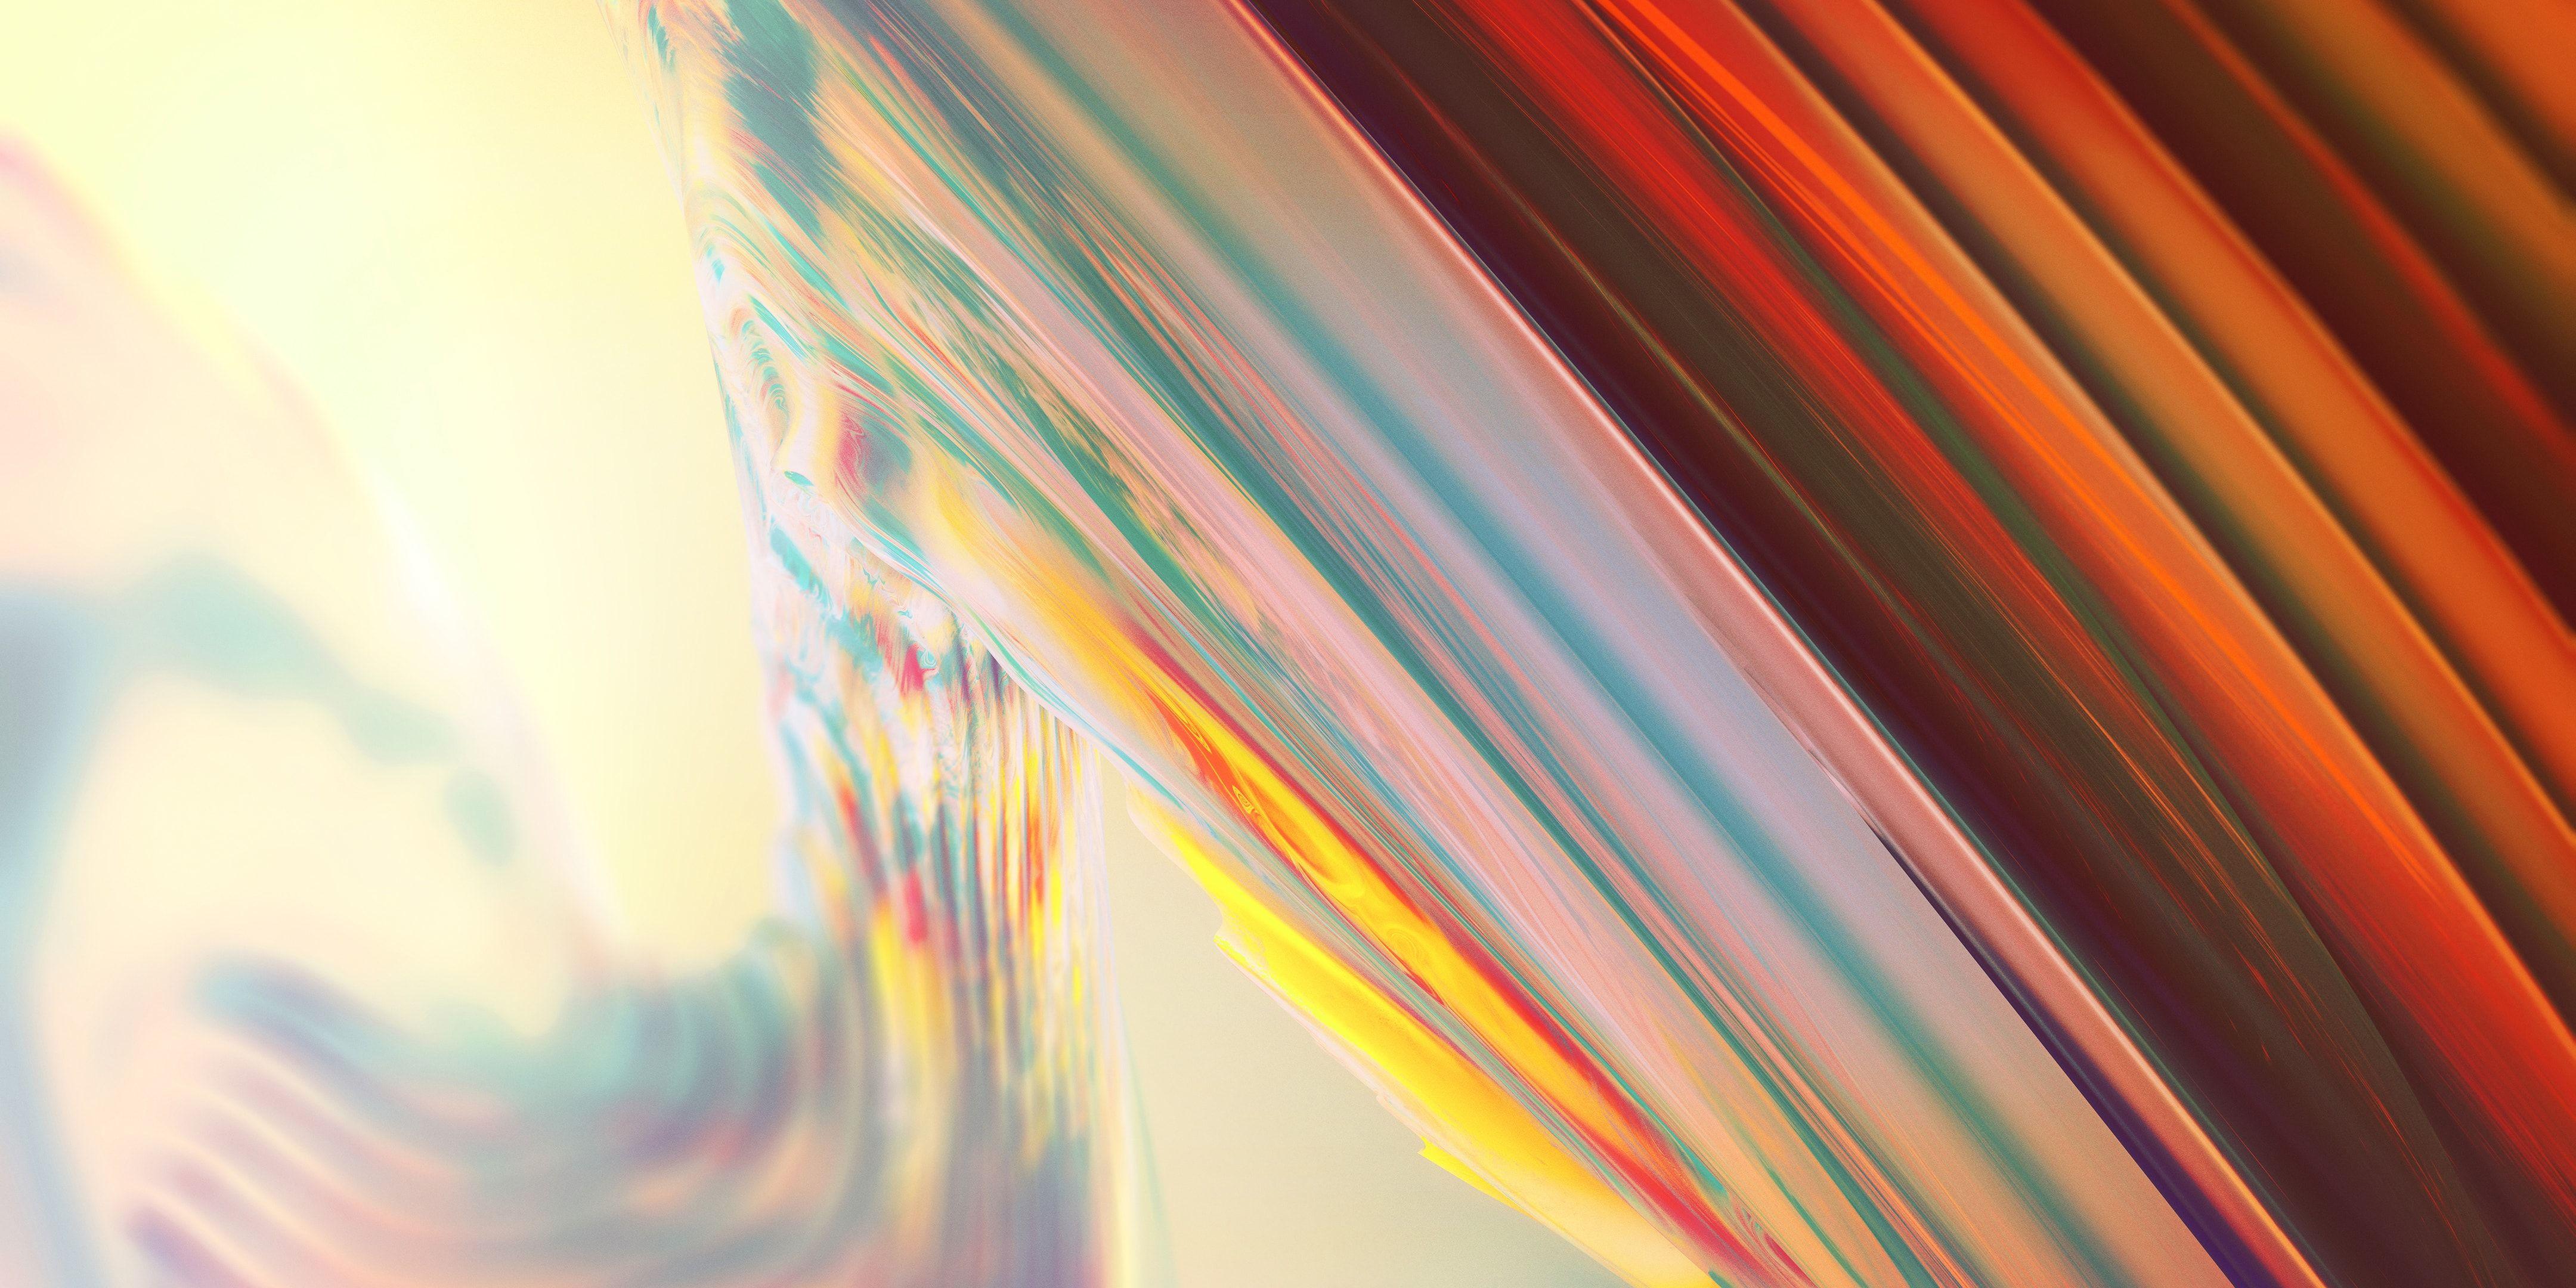 Waves Abstraction Colored Lines 4k. Abstract Desktop Wallpaper